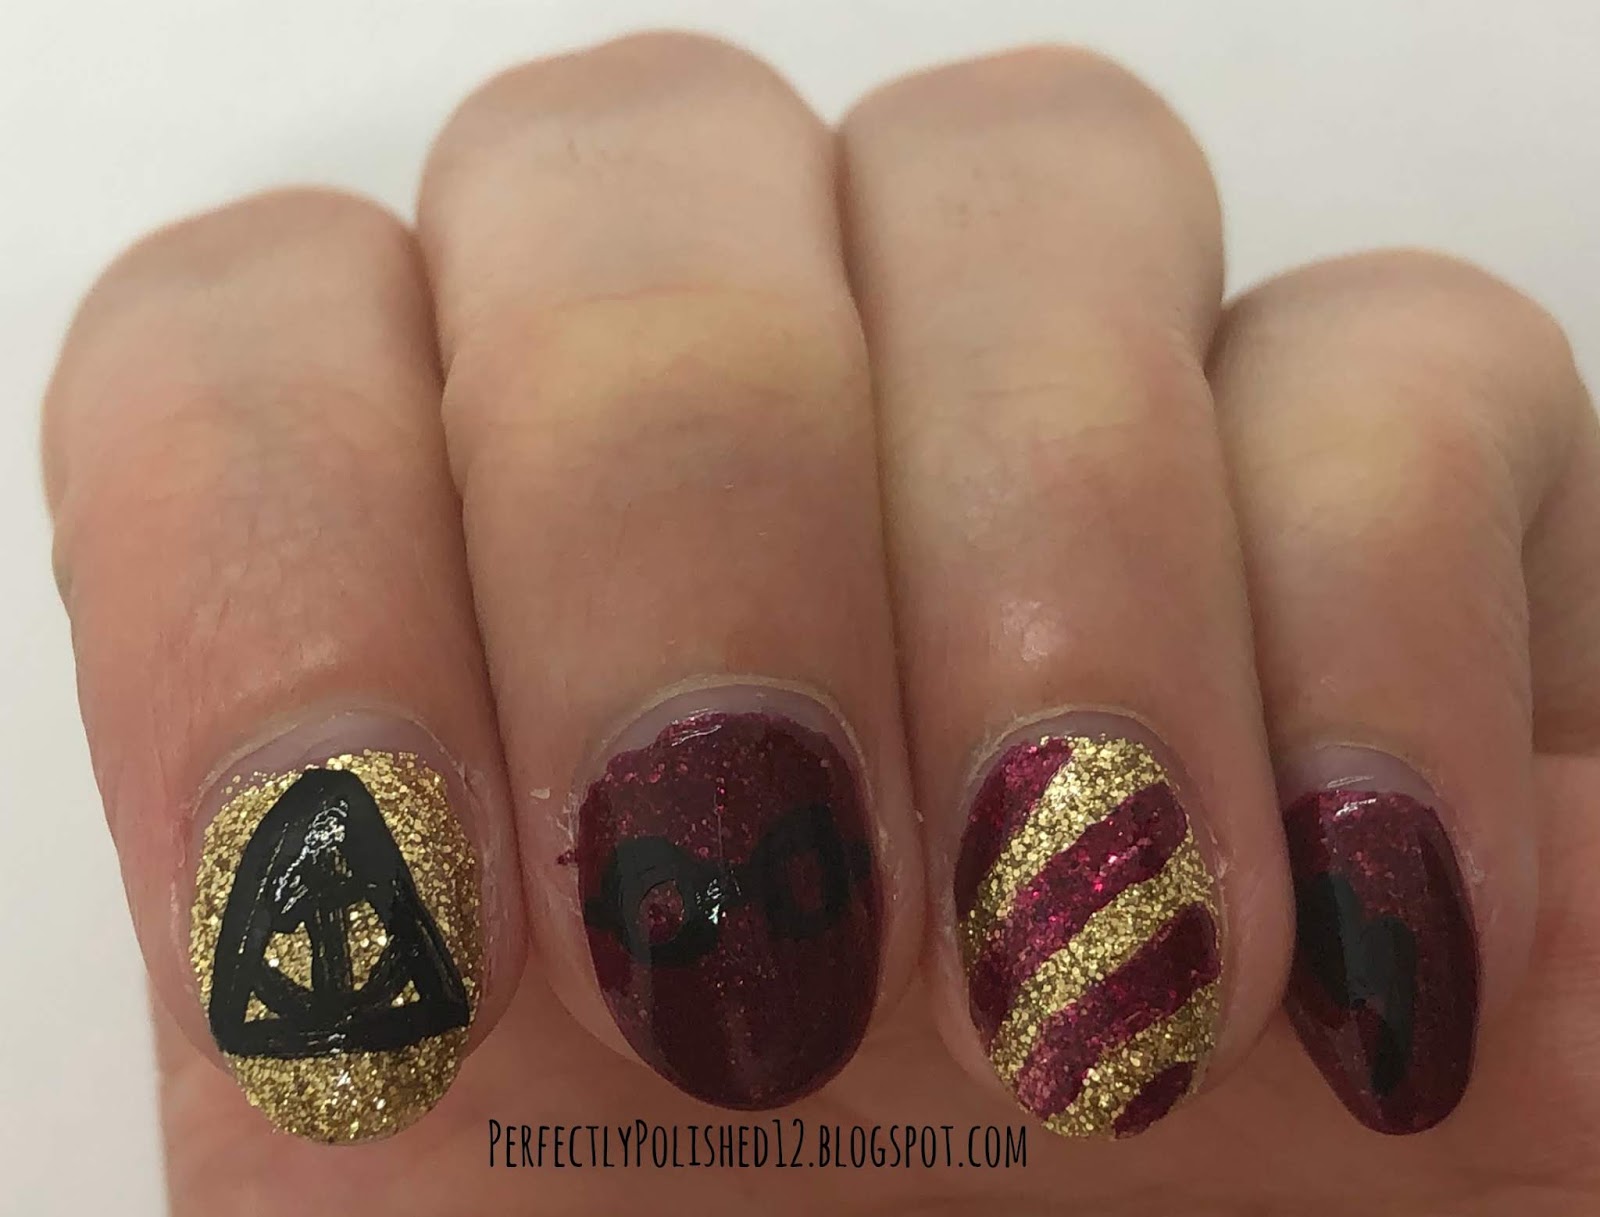 Harry Potter Nail Art Tutorial - YouTube - wide 6